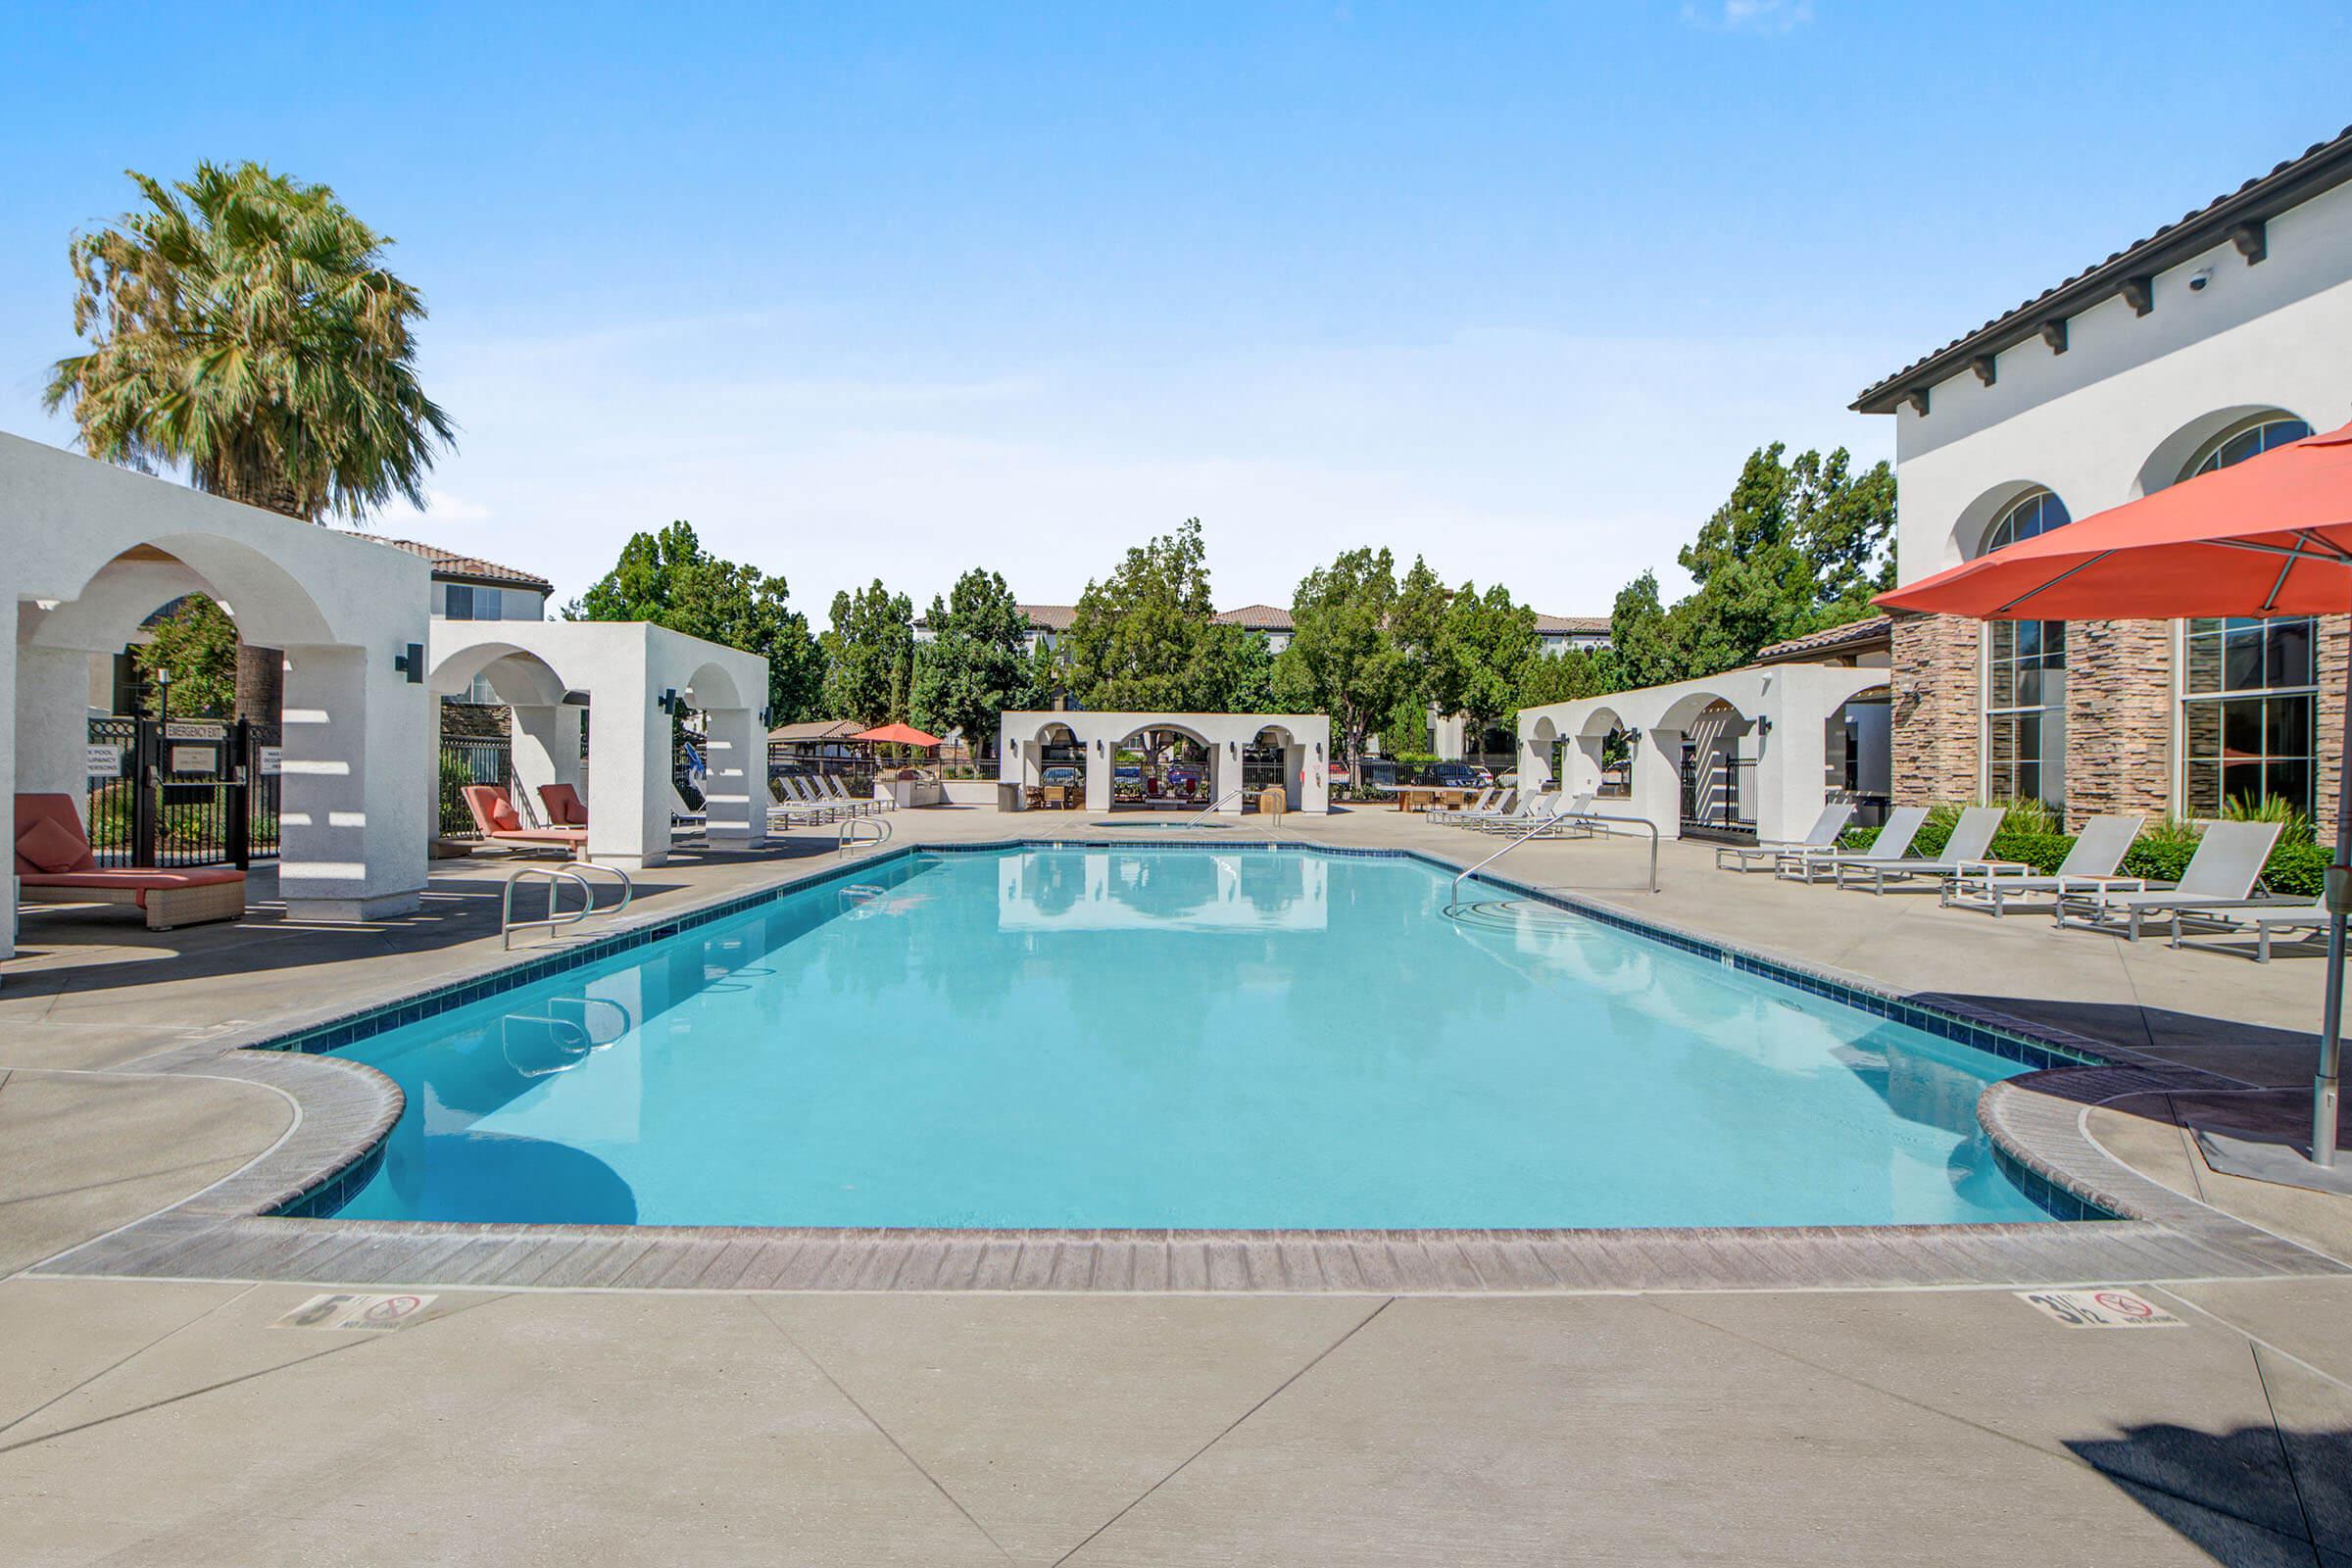 Pool at Rancho Cucamonga apartment complex